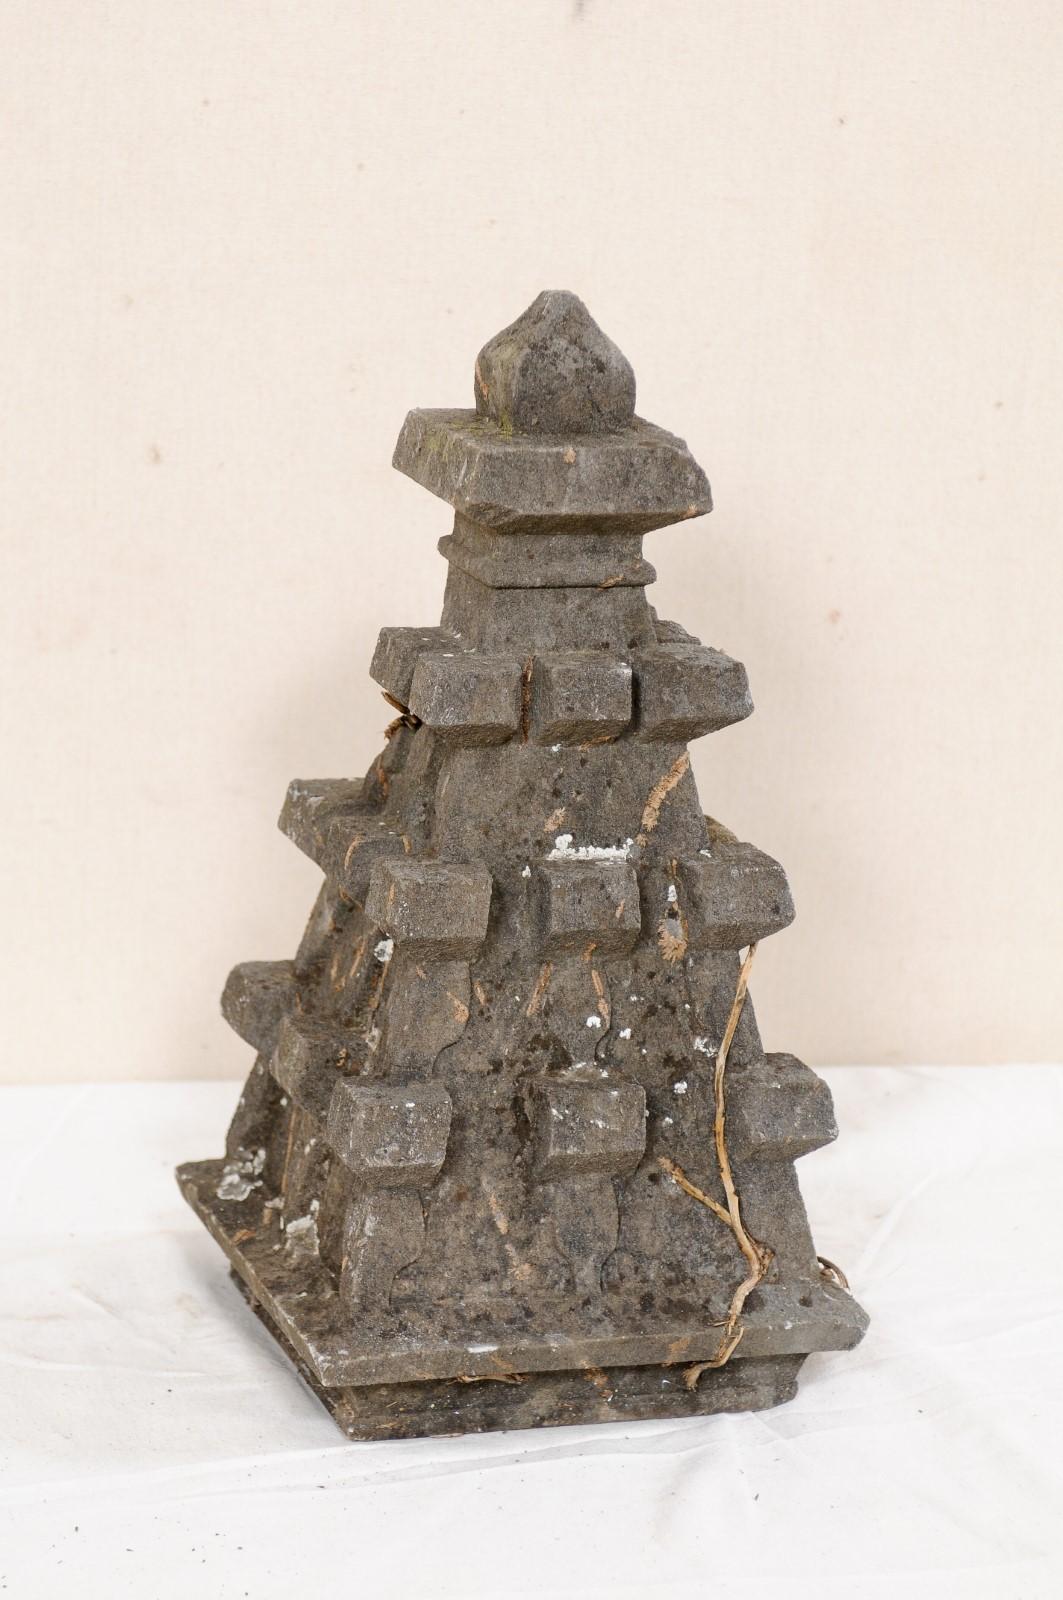 A French stone architectural finial. This epis de faitage (or finial) stands approximately 19.25